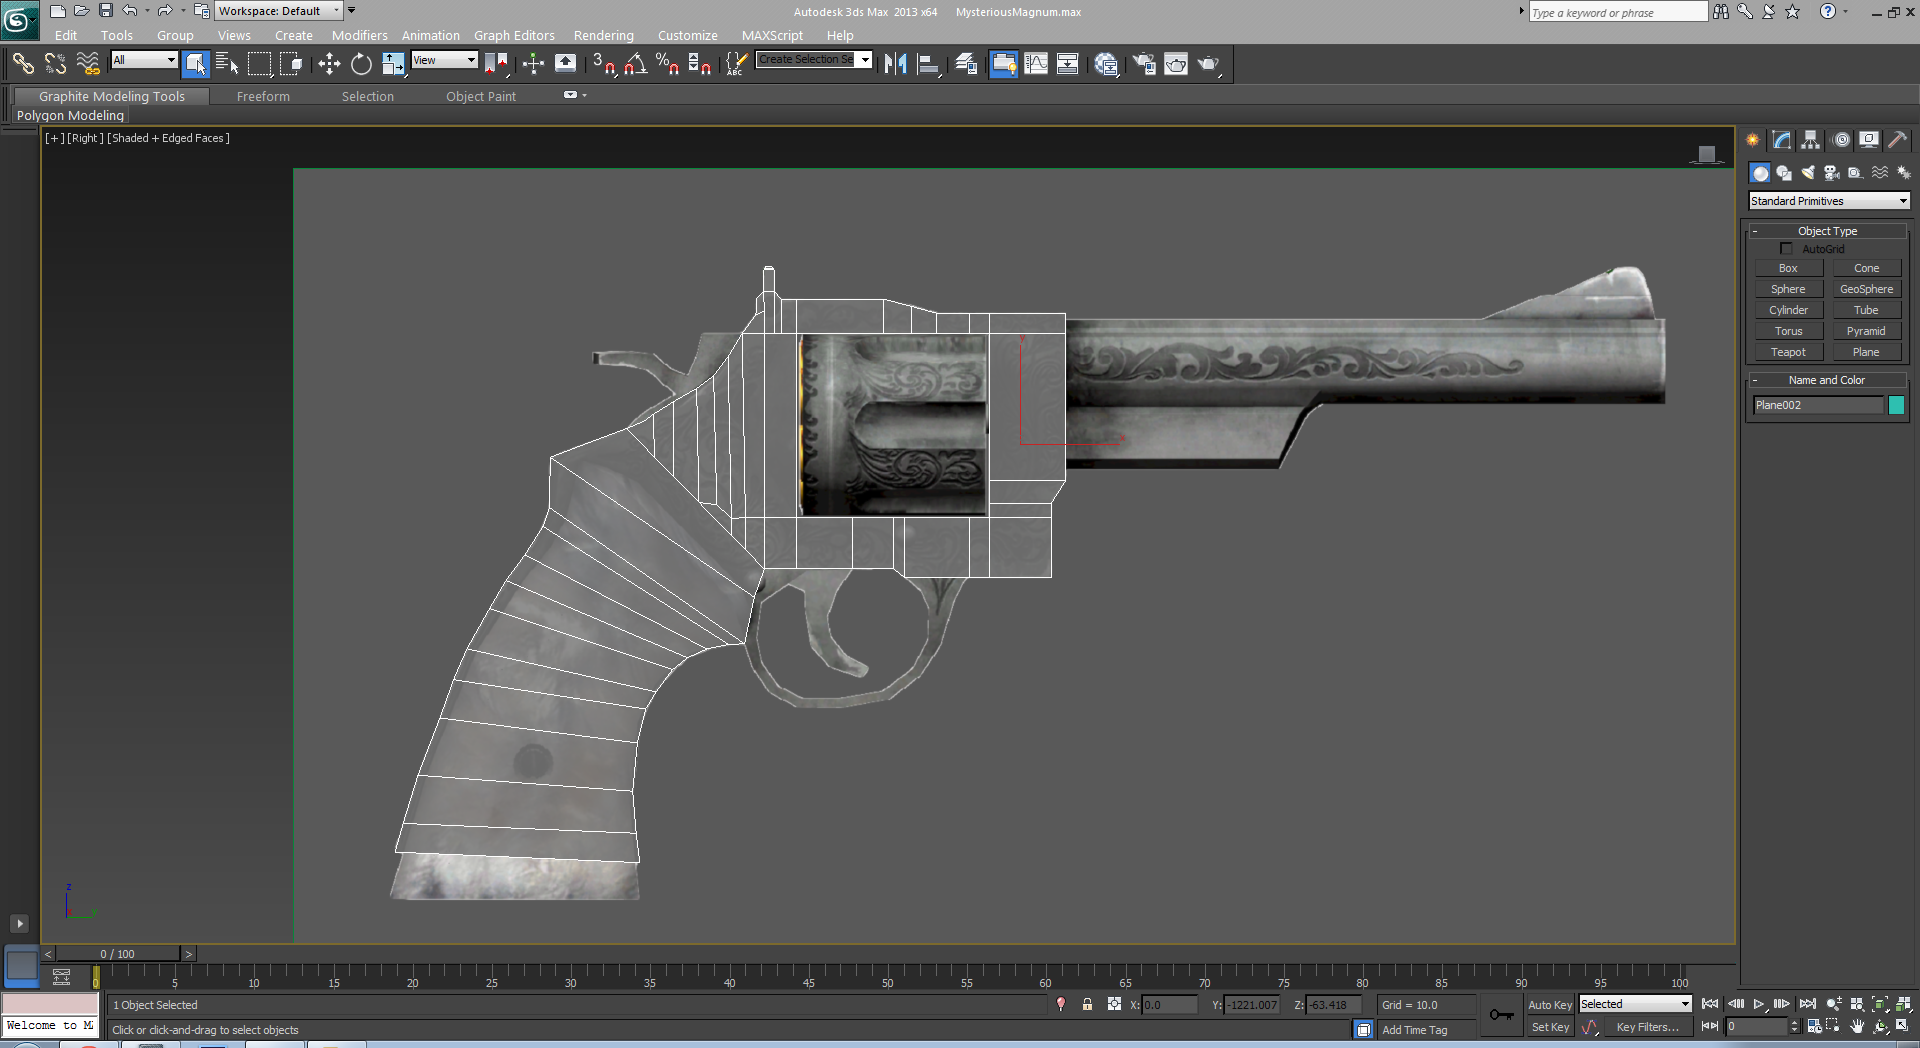 Better way to model this gun than splines - Autodesk Community - 3ds Max